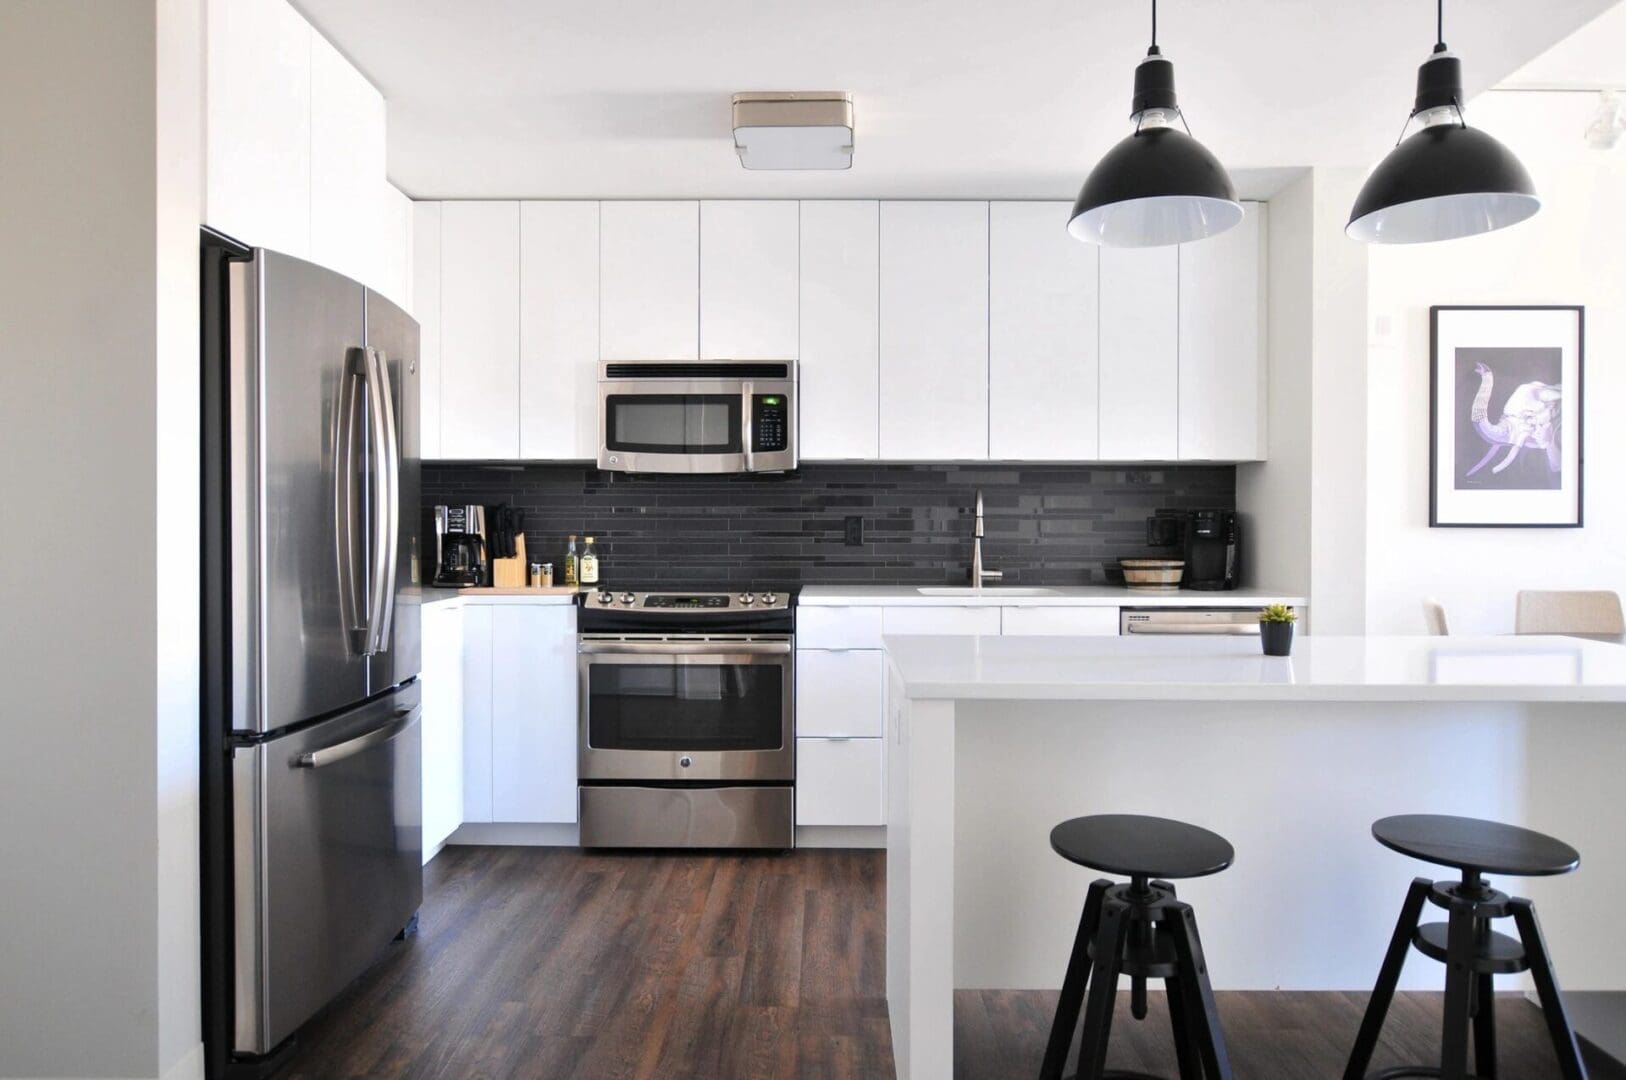 A kitchen with white cabinets and black appliances.